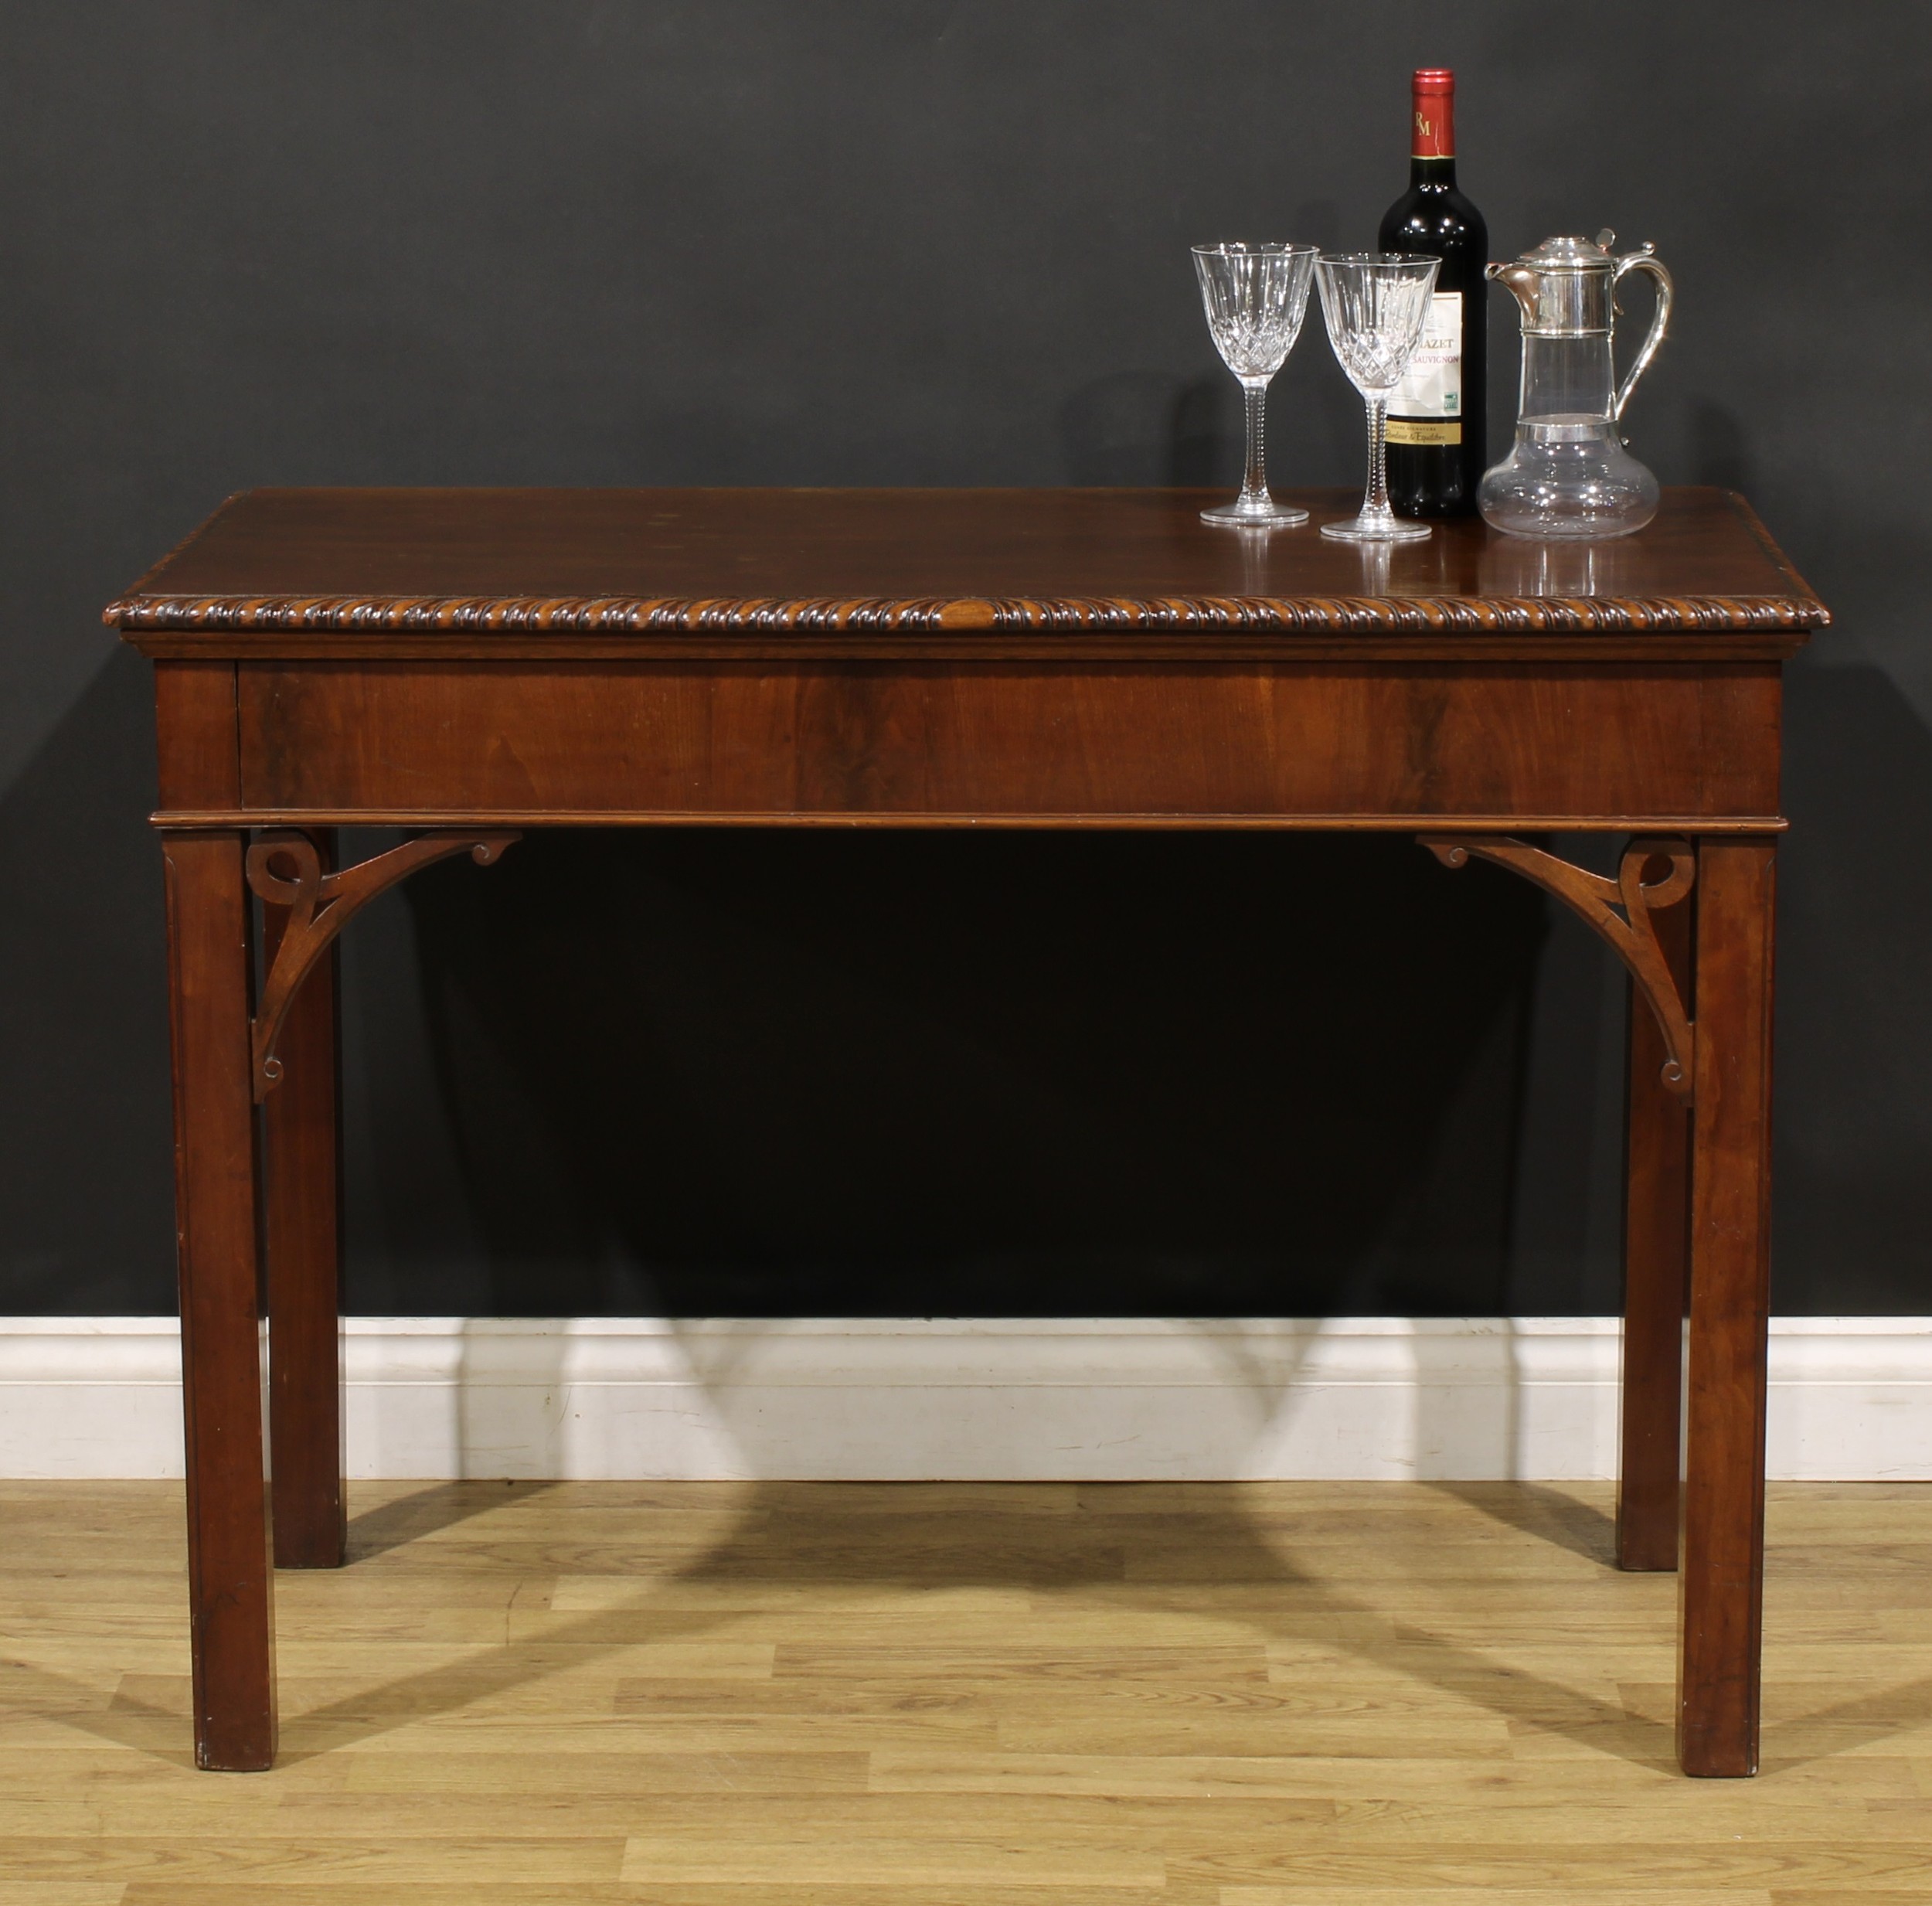 A 19th century Chippendale Revival mahogany side or serving table, rectangular top with gadrooned